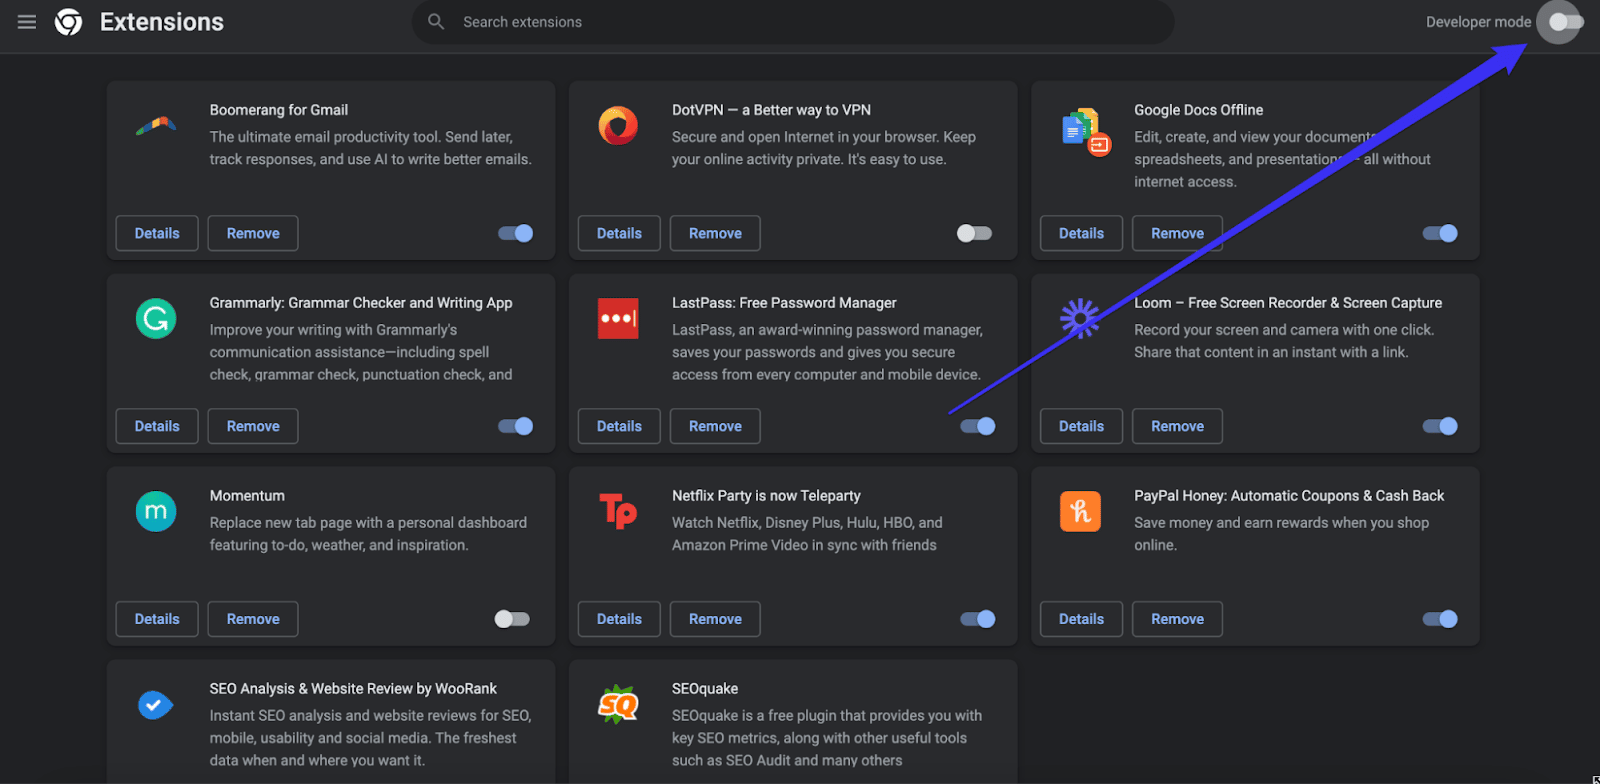 The developer mode in the chrome extensions hub